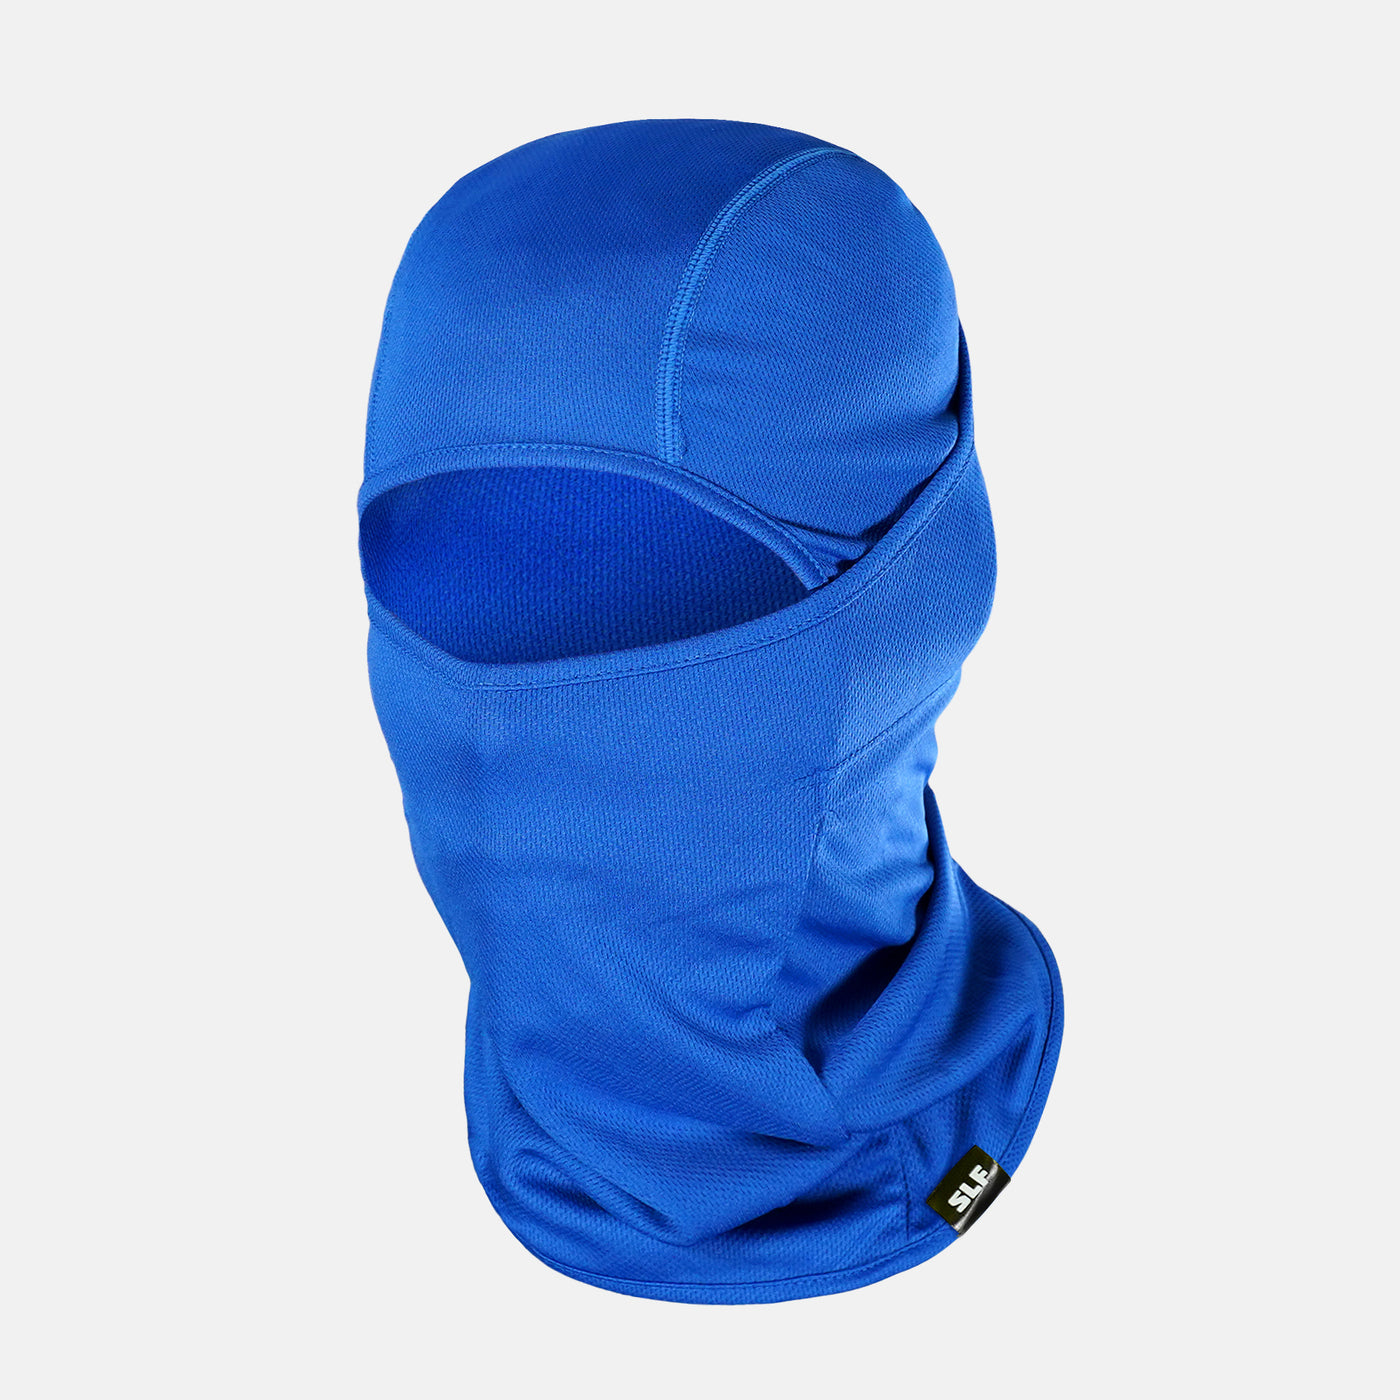 Cobalt Blue Loose-fitting Shiesty Mask